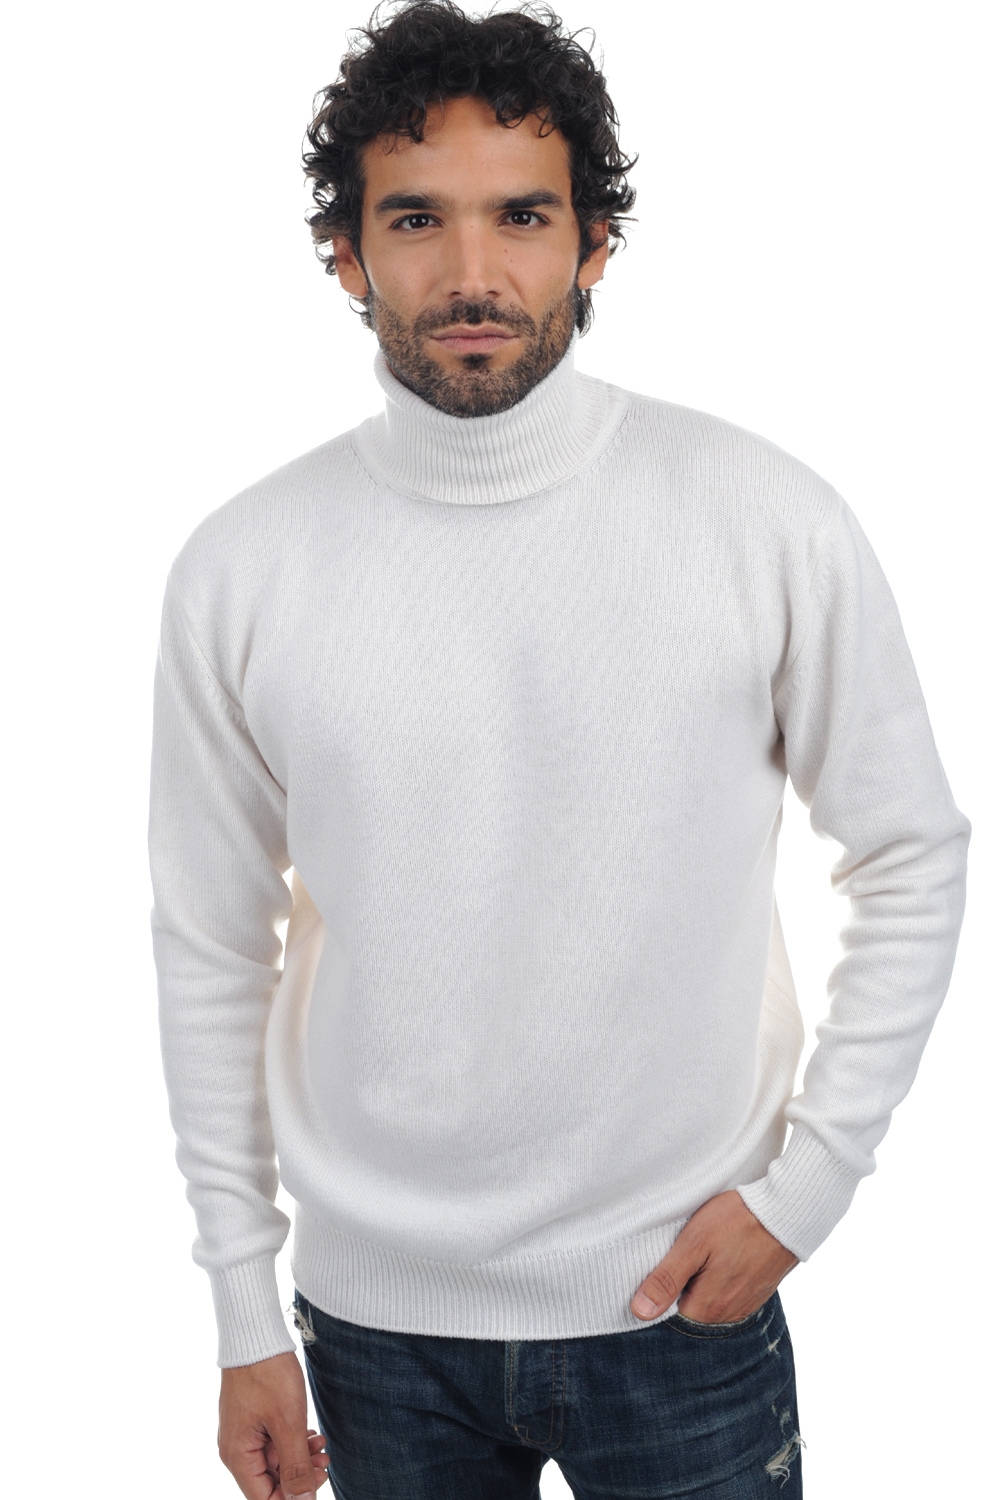 Cachemire pull homme col roule edgar 4f blanc casse l